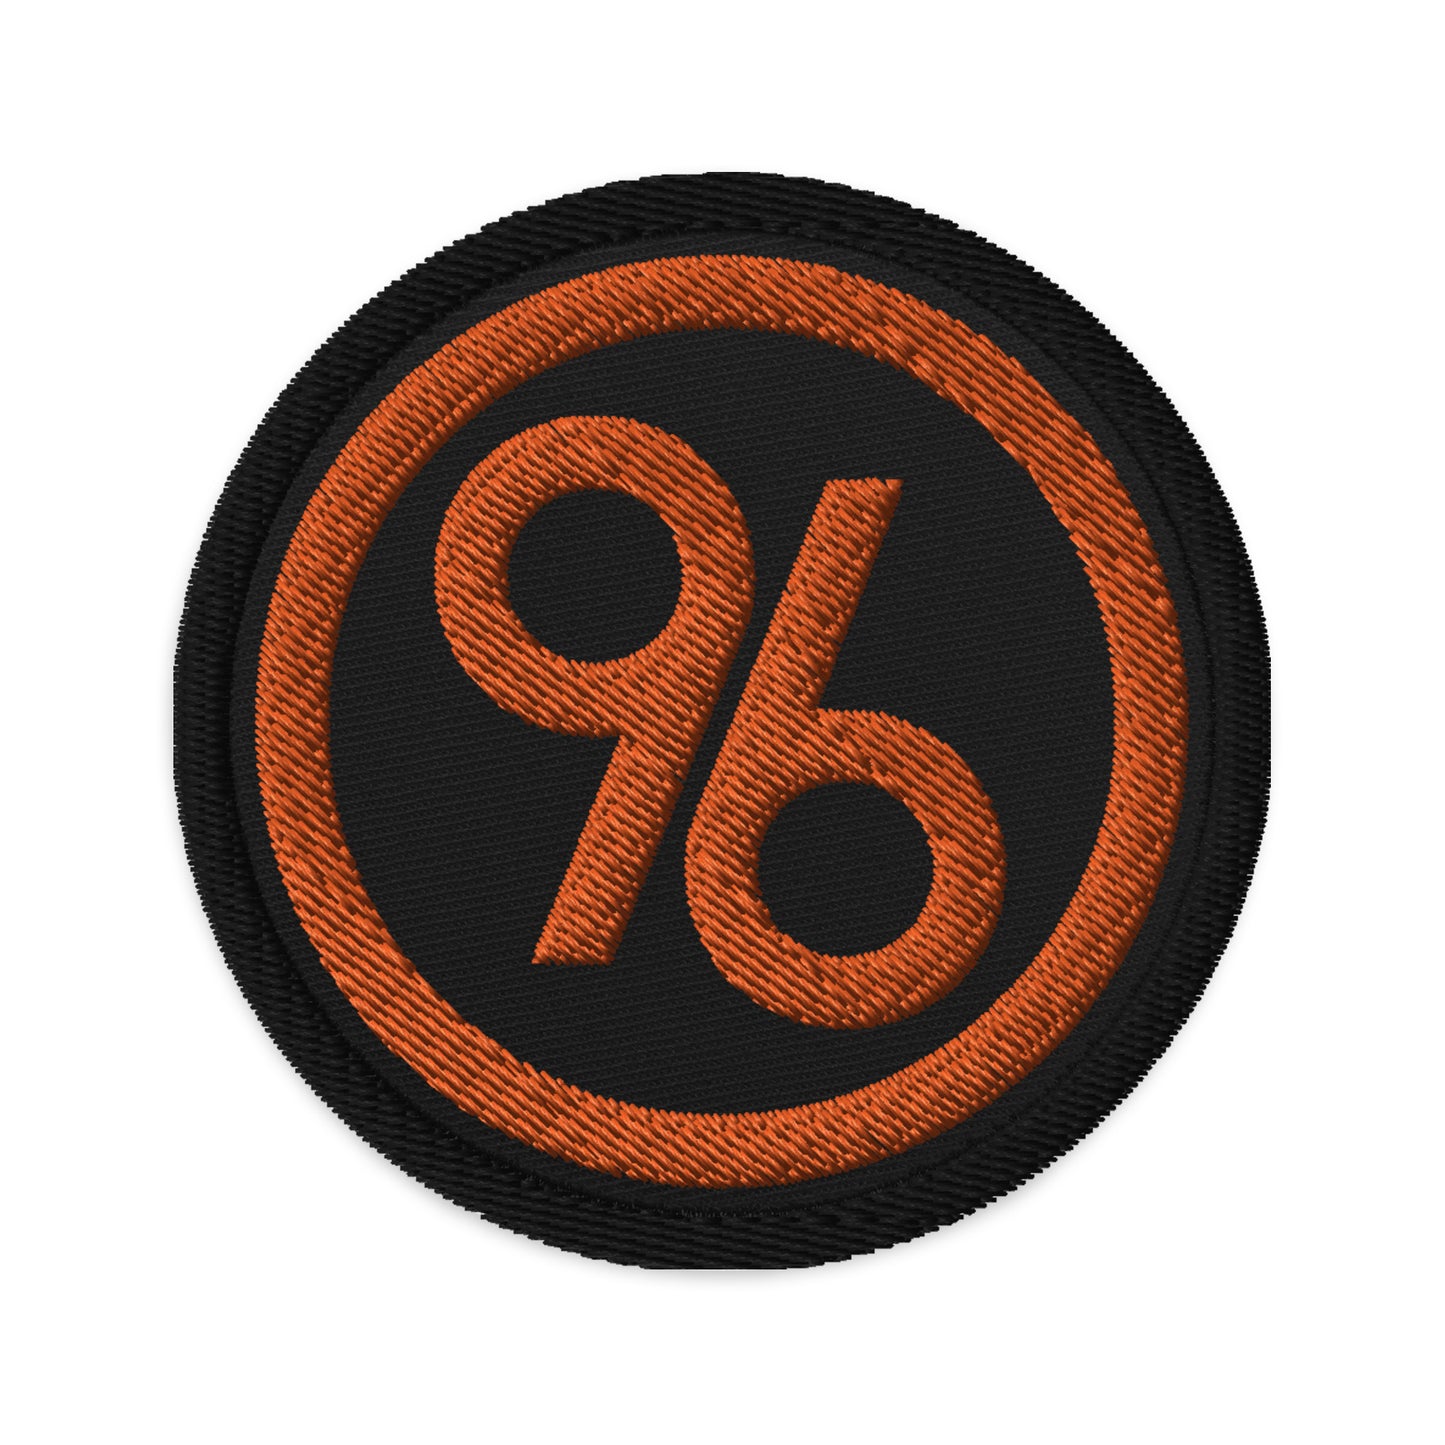 2% Jazz 96 - Embroidered Patch